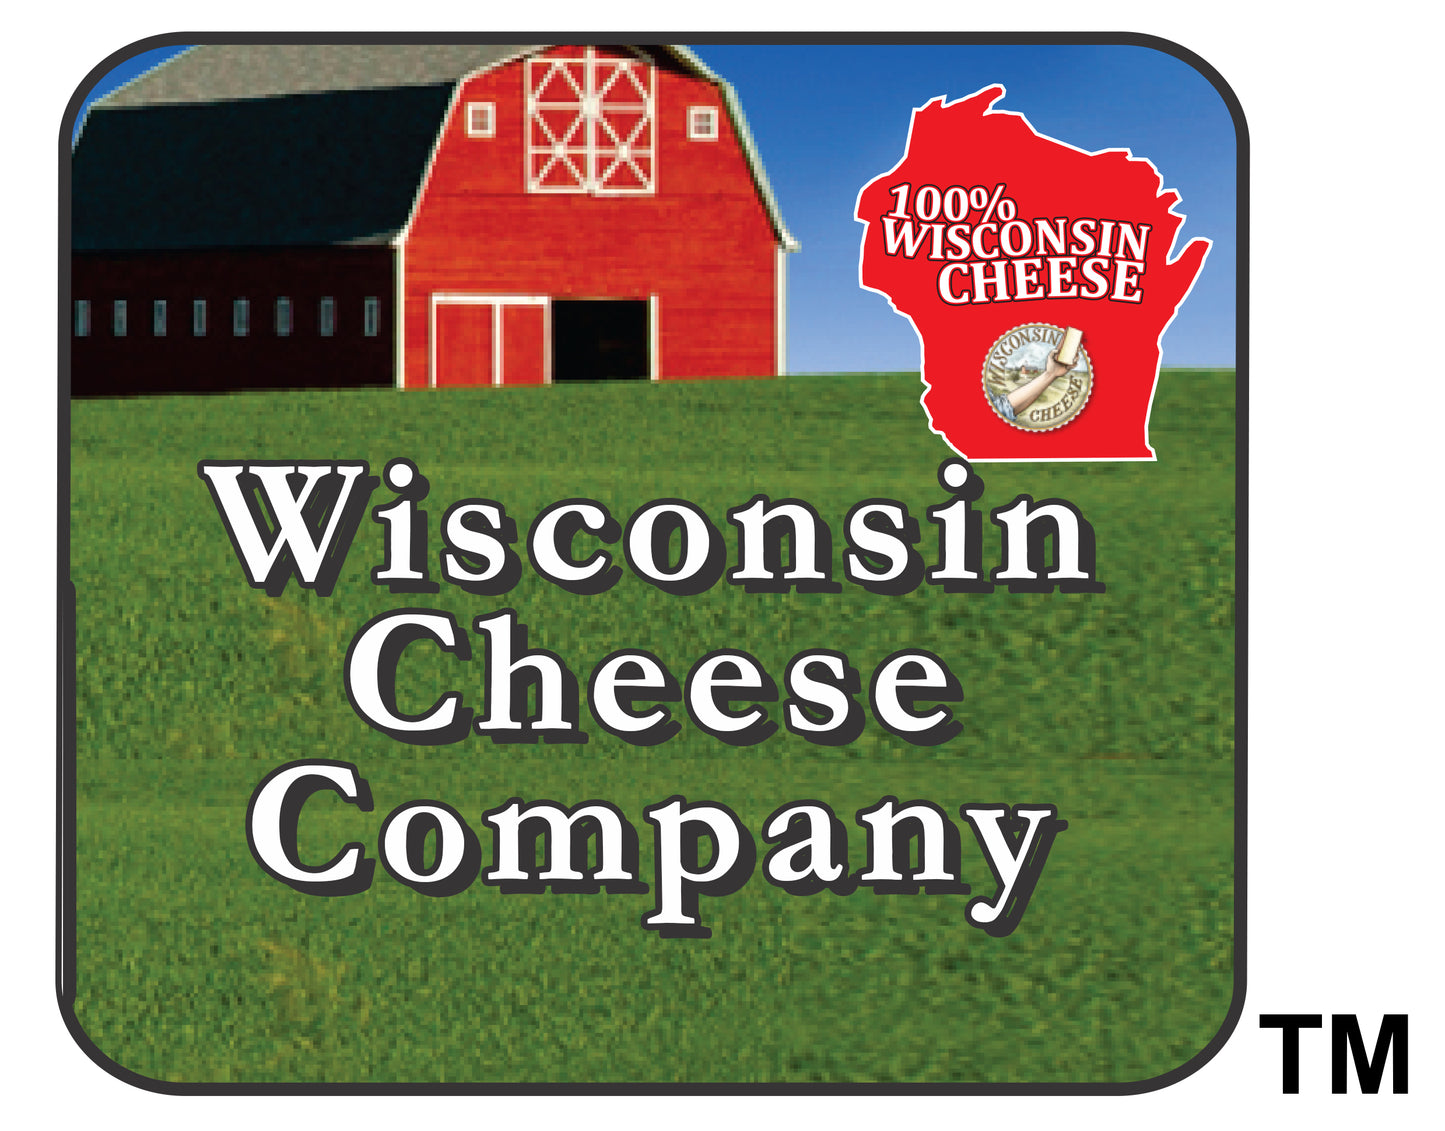 Longhorn Colby Cheese Blocks, 7 oz. Per Block, Wisconsin Cheese Company™ Cheese and Cracker Snack